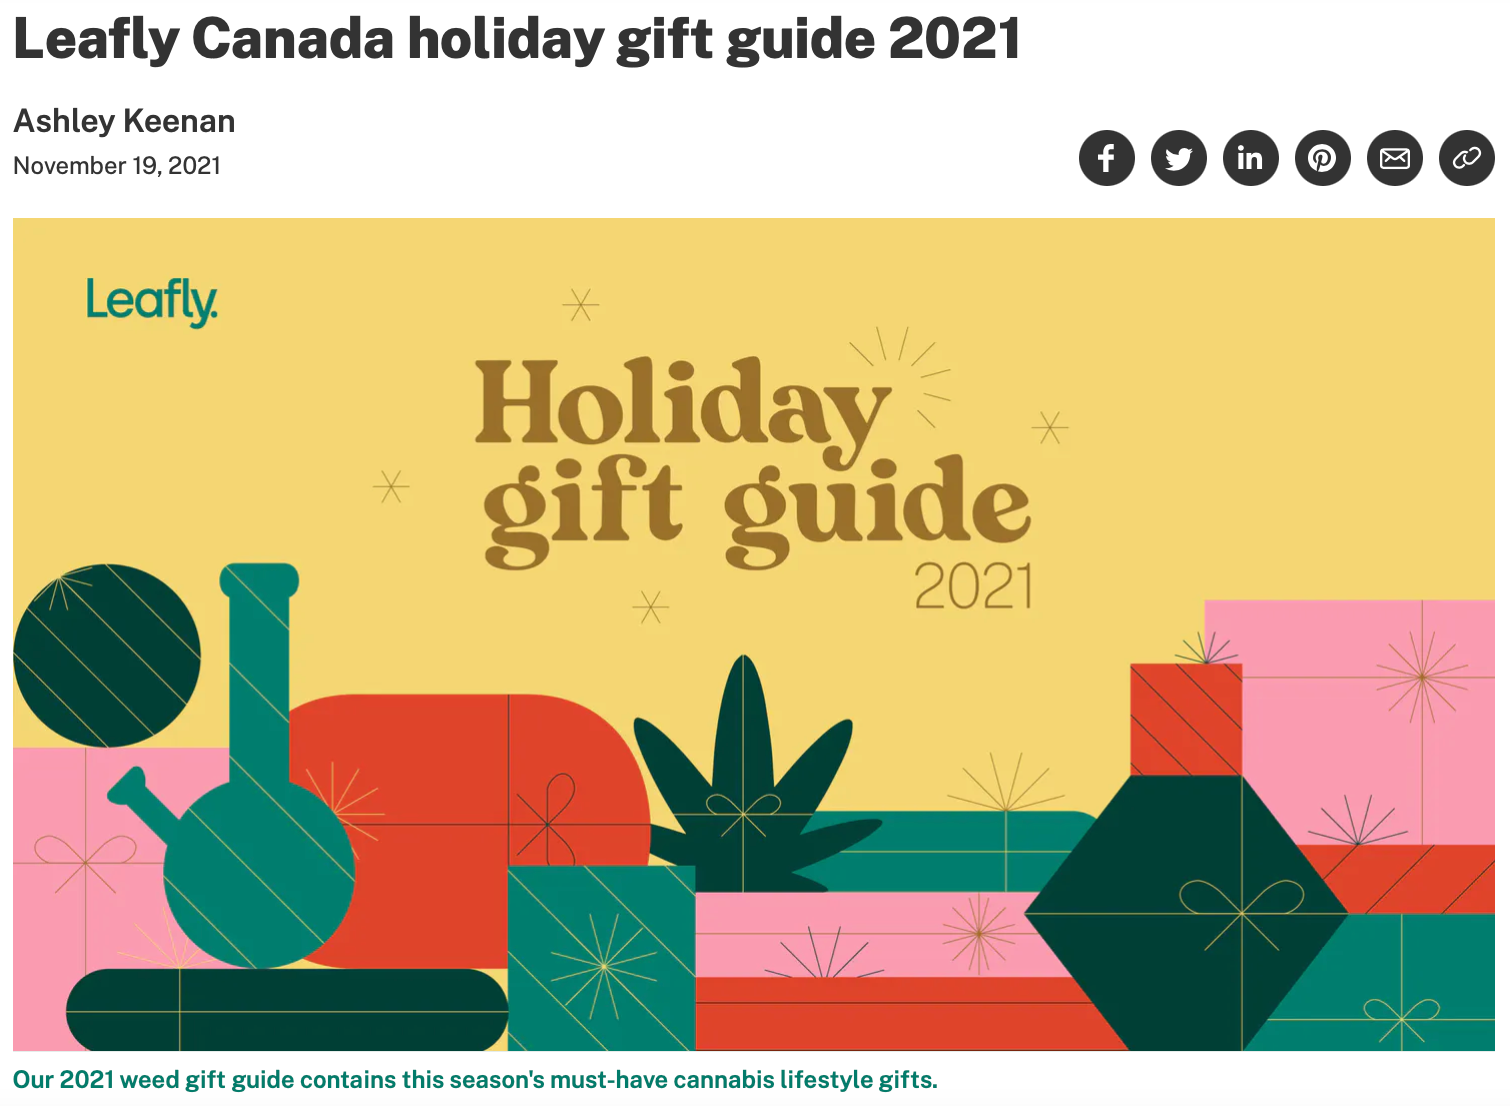 Leafly Canada Holiday Gift Guide 